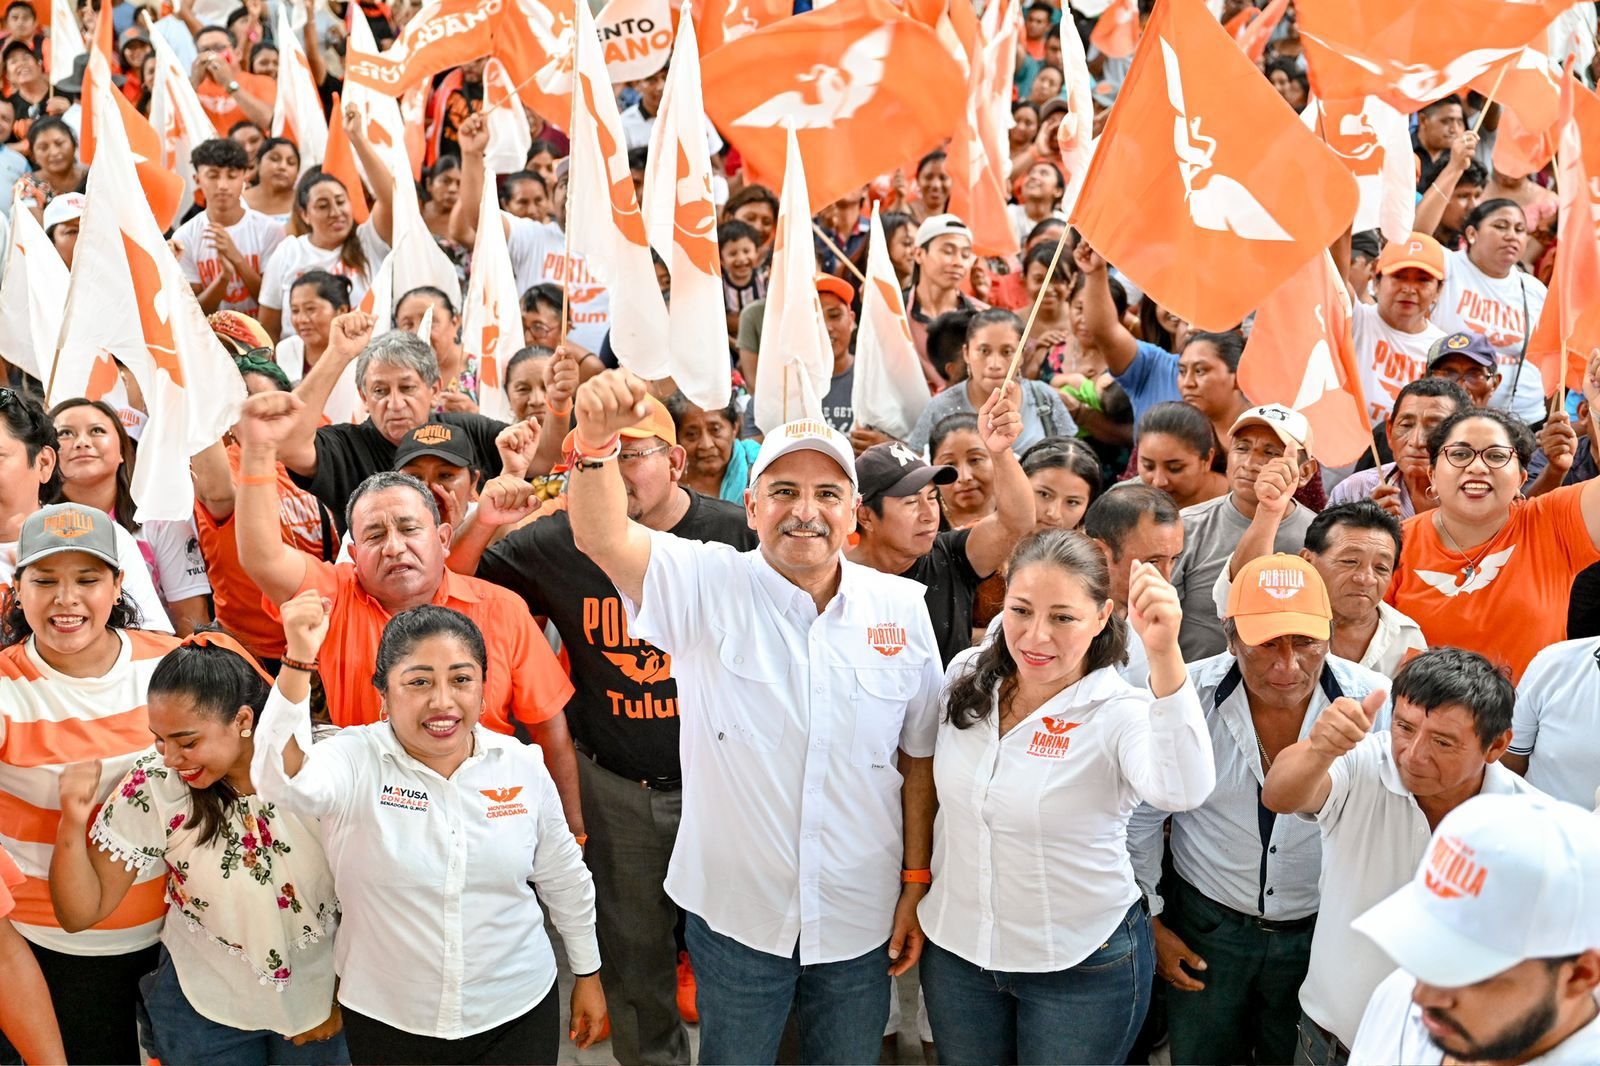 A group of people at a political rally waving orange flags and showing support with raised fists, some wearing branded clothing and hats.